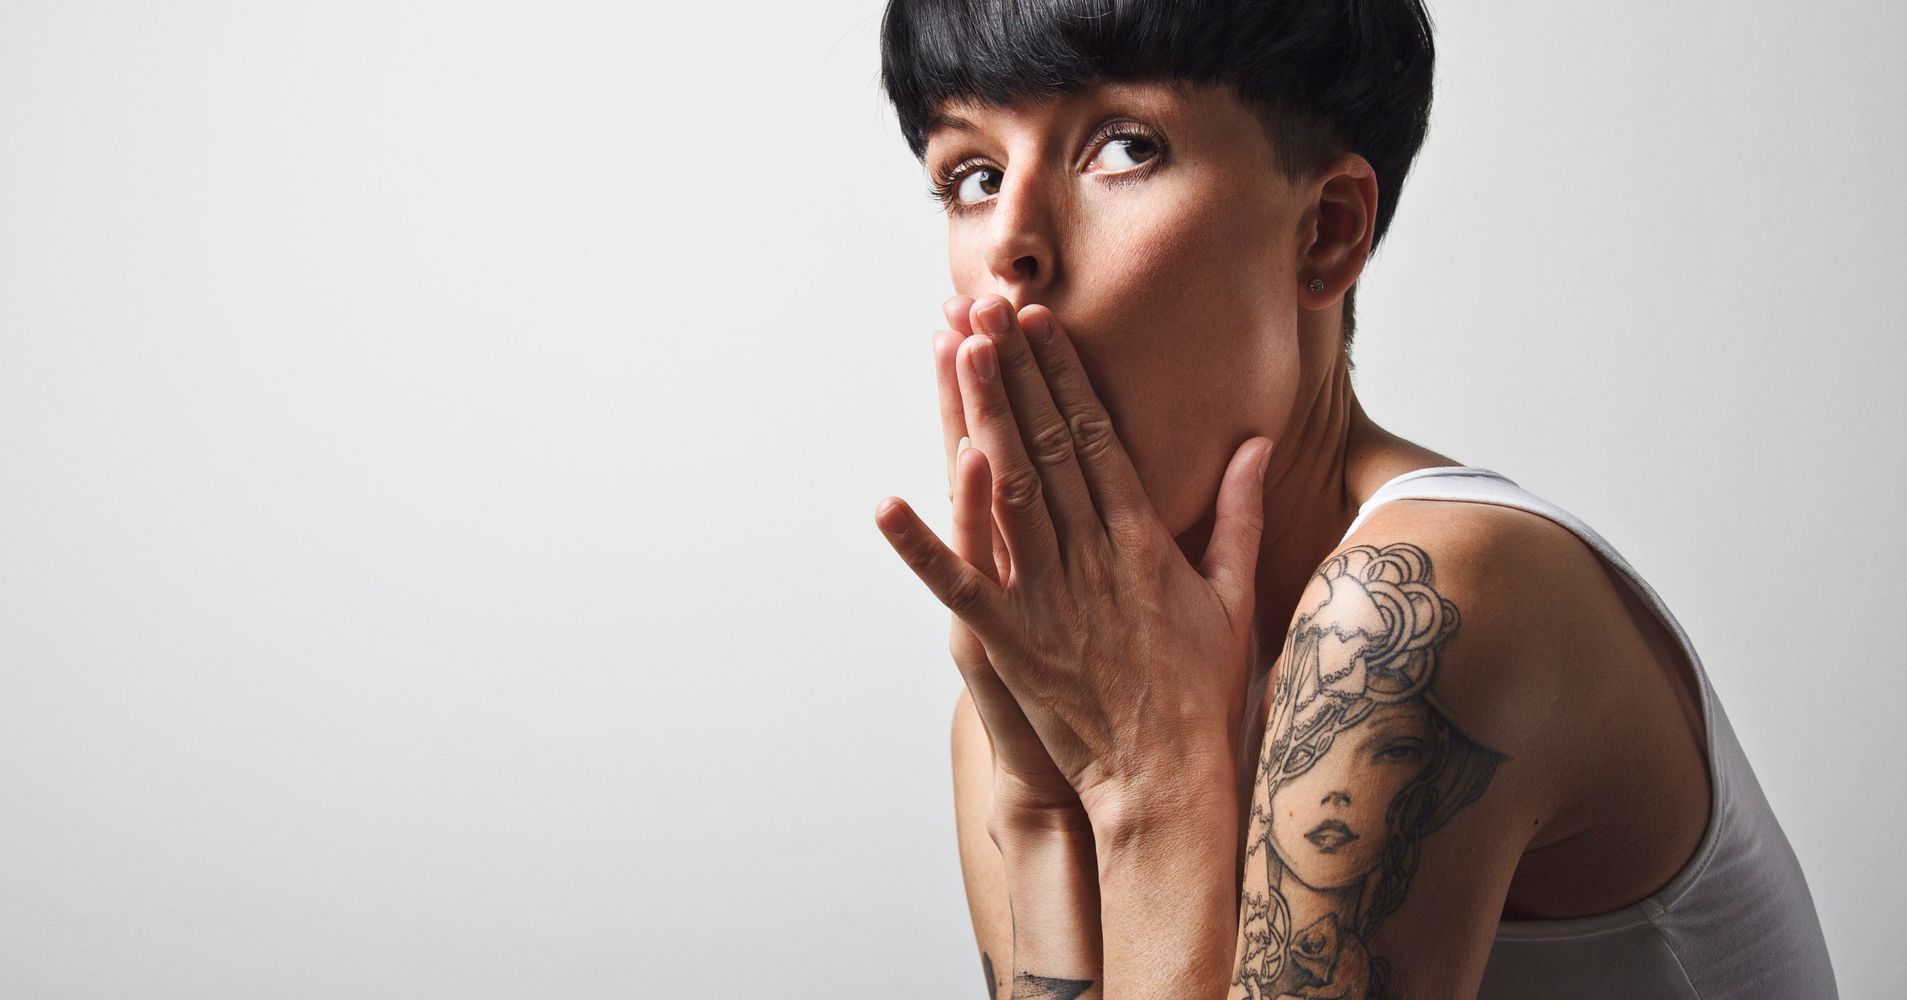 Why Do So Many Queer Women Have Tattoos? | HuffPost